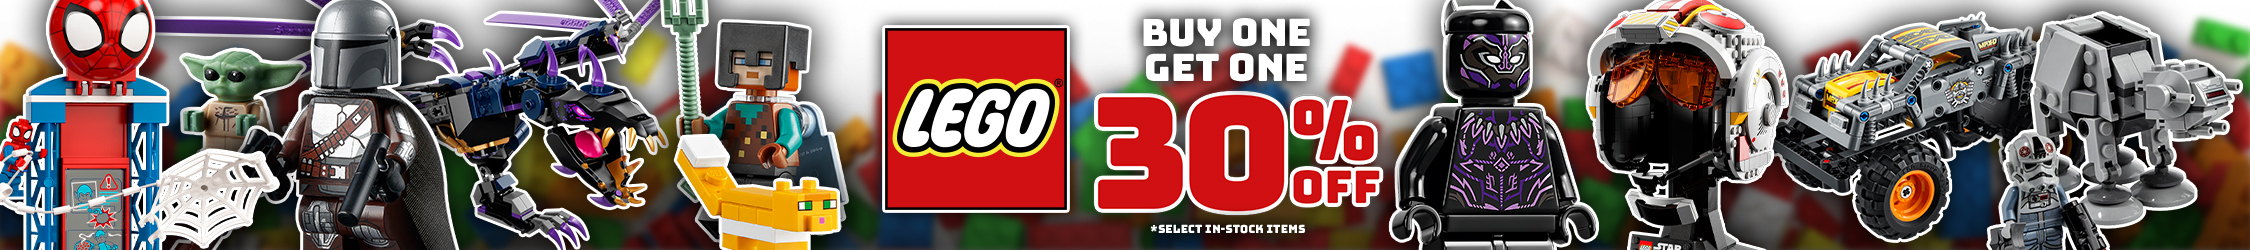 Buy One Get One 30% off on In-Stock Lego